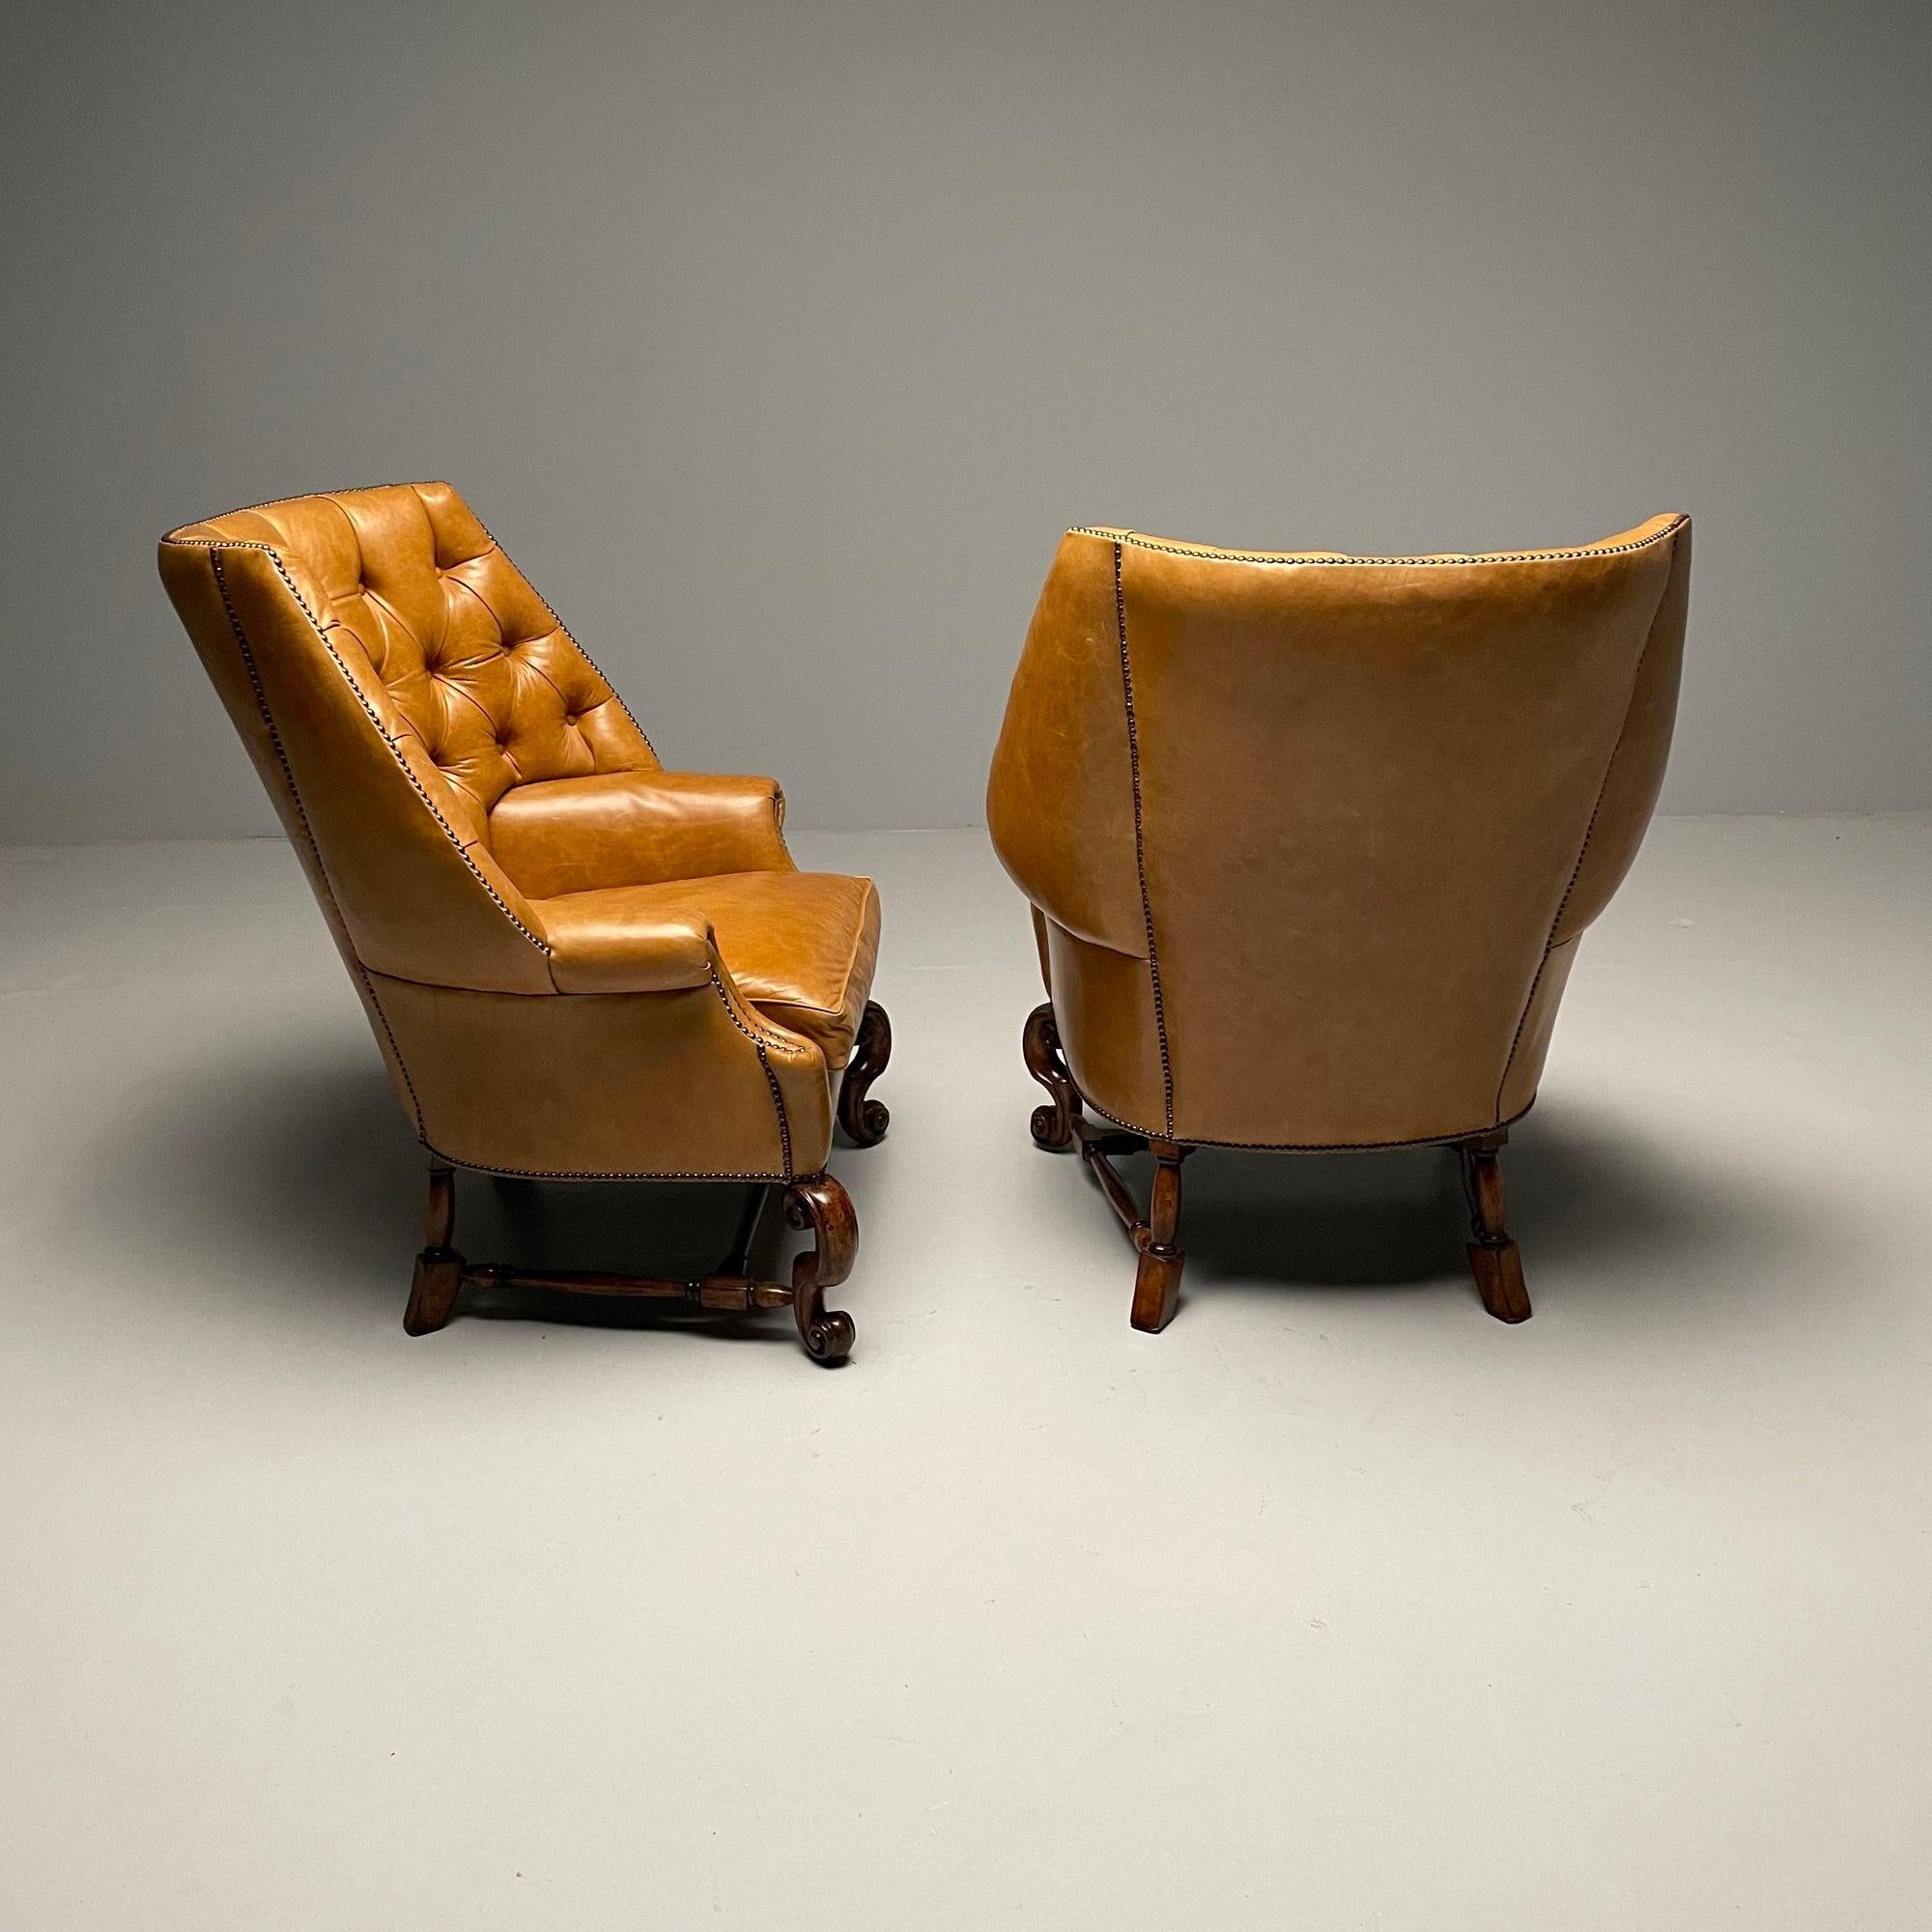 Georgian, Large Tufted Lounge Chairs and Ottomans, Tan Leather, USA, 2000s For Sale 2